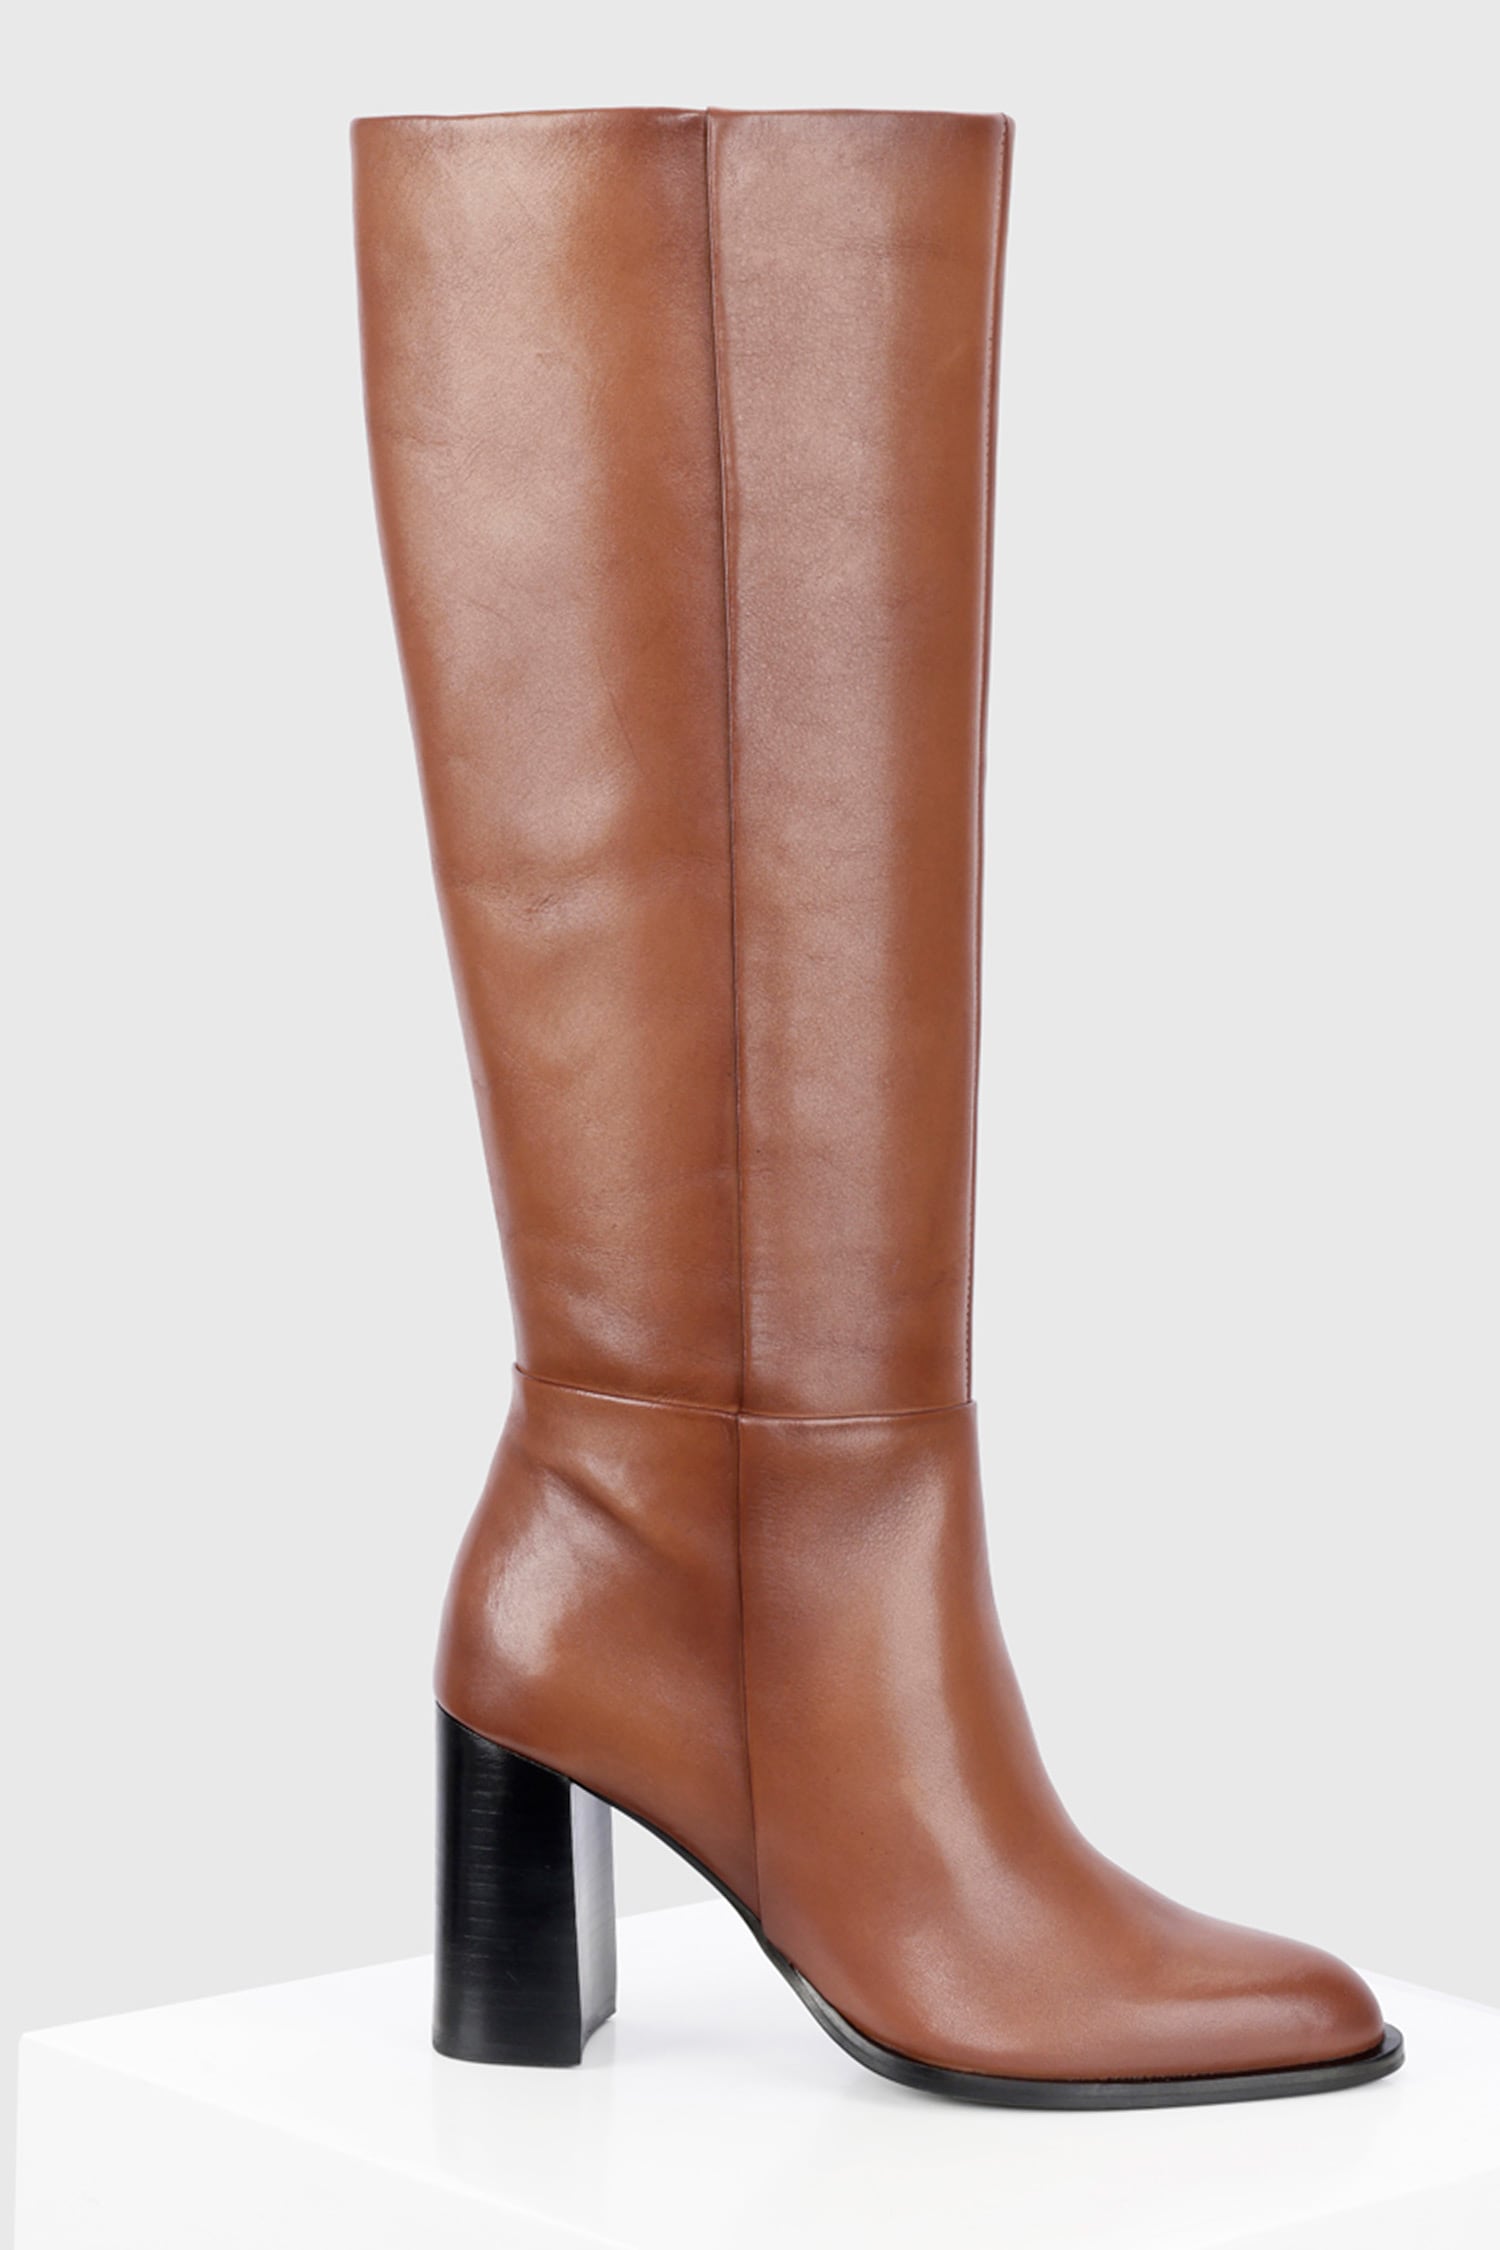 LOVER HIGH ANKLE BOOTS TAN LEATHER - Jo Mercer